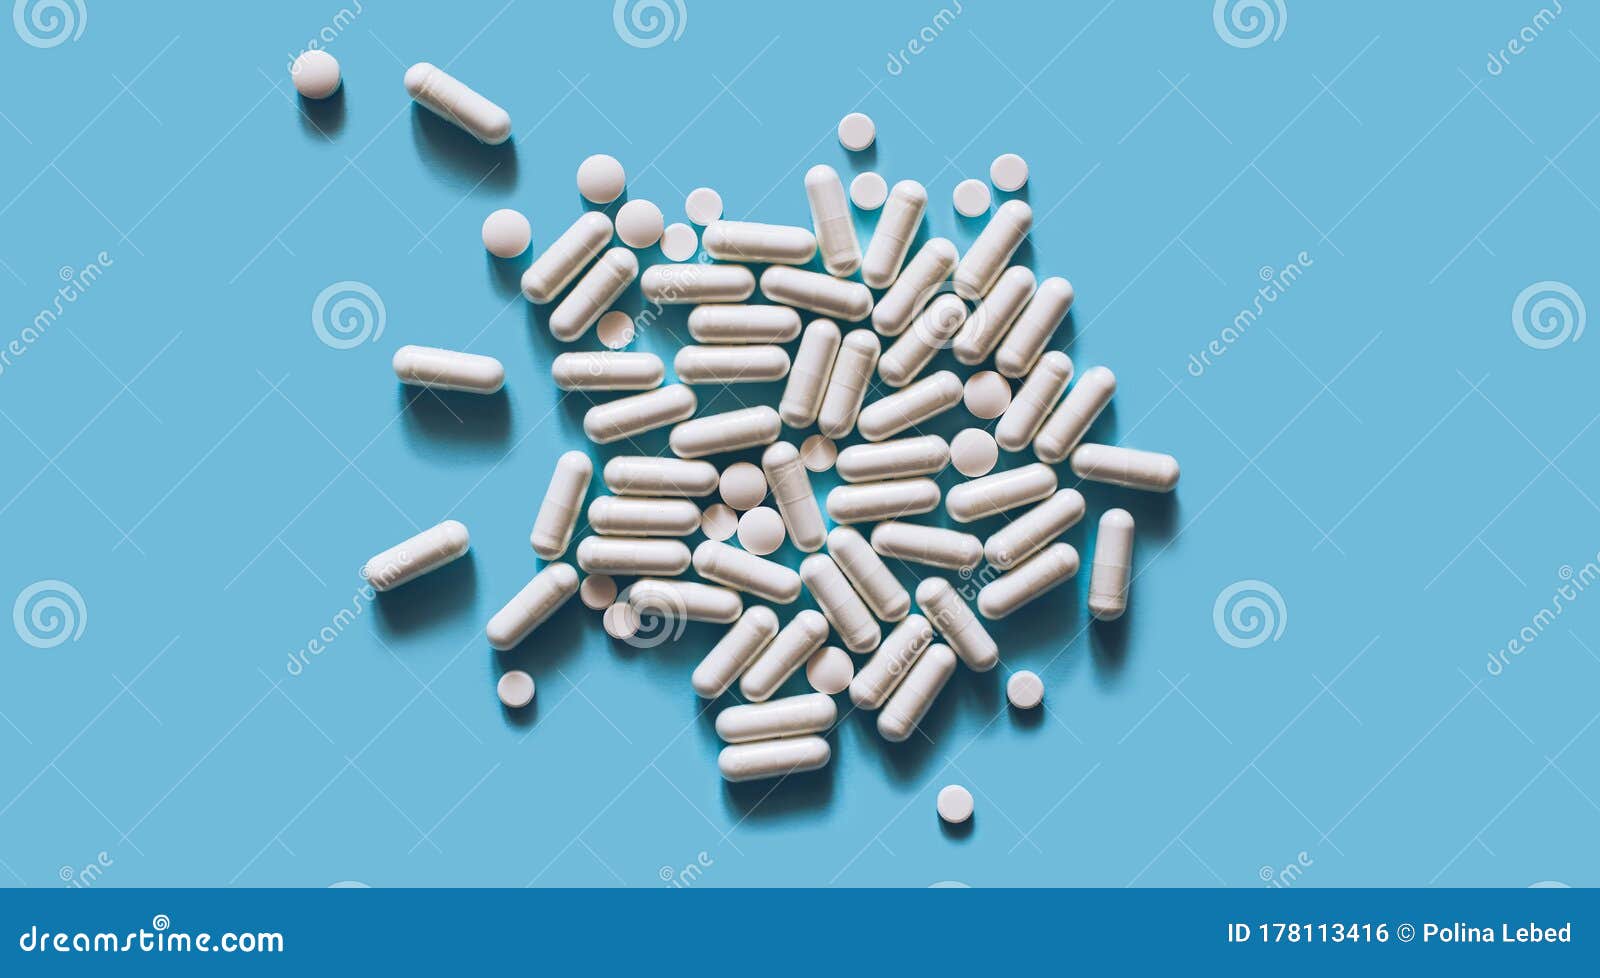 white medical pills and capsules or vitamines on blue background. copy space.